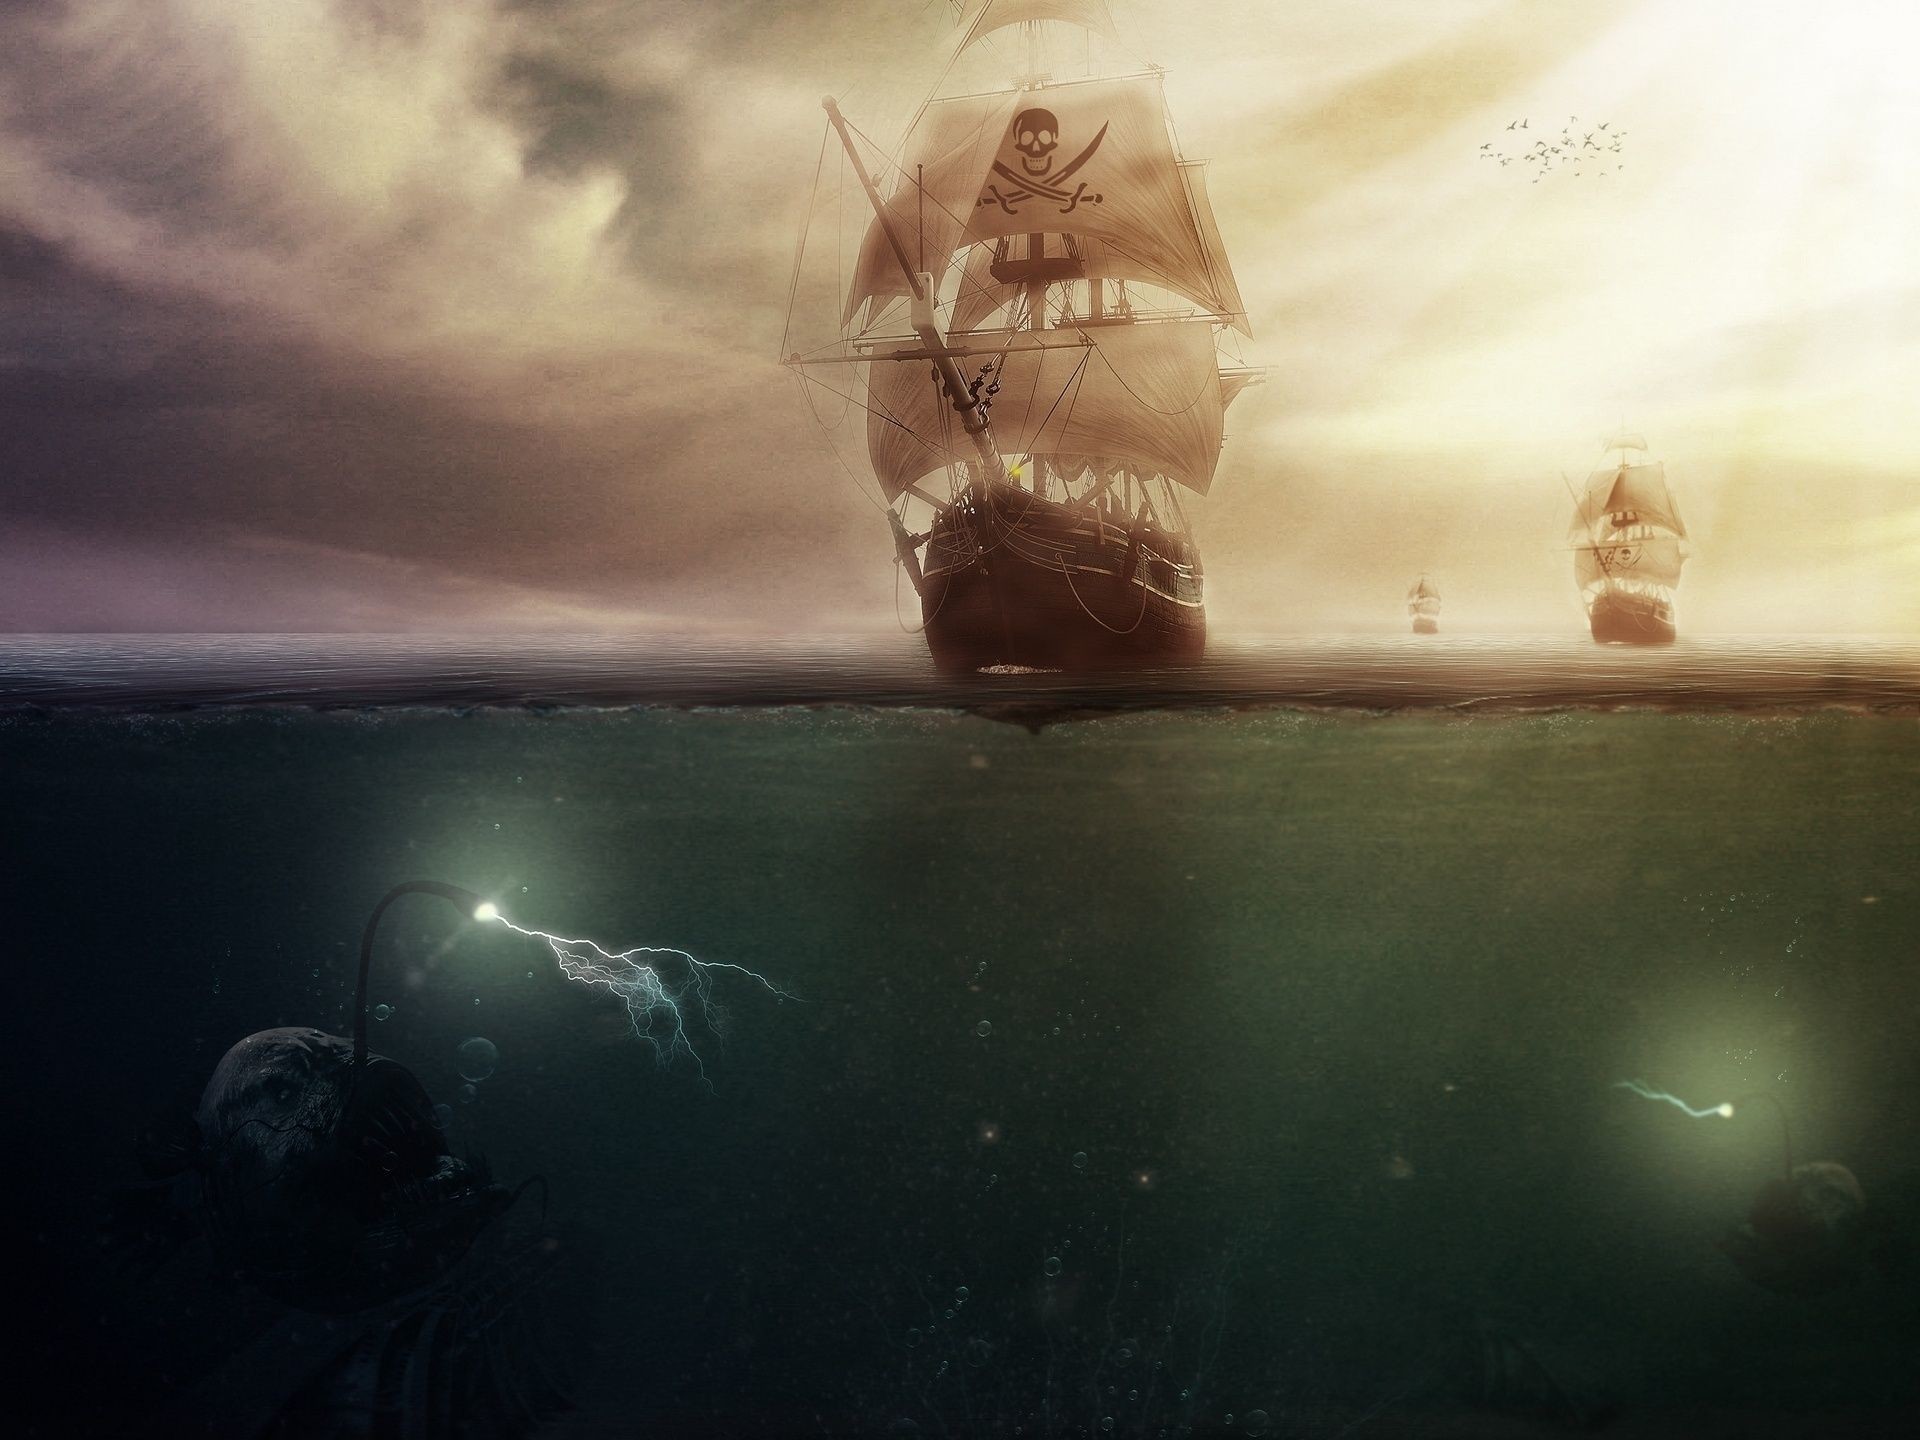 1920x1440 Pirate Ship Wallpaper For Iphone #1i9o >